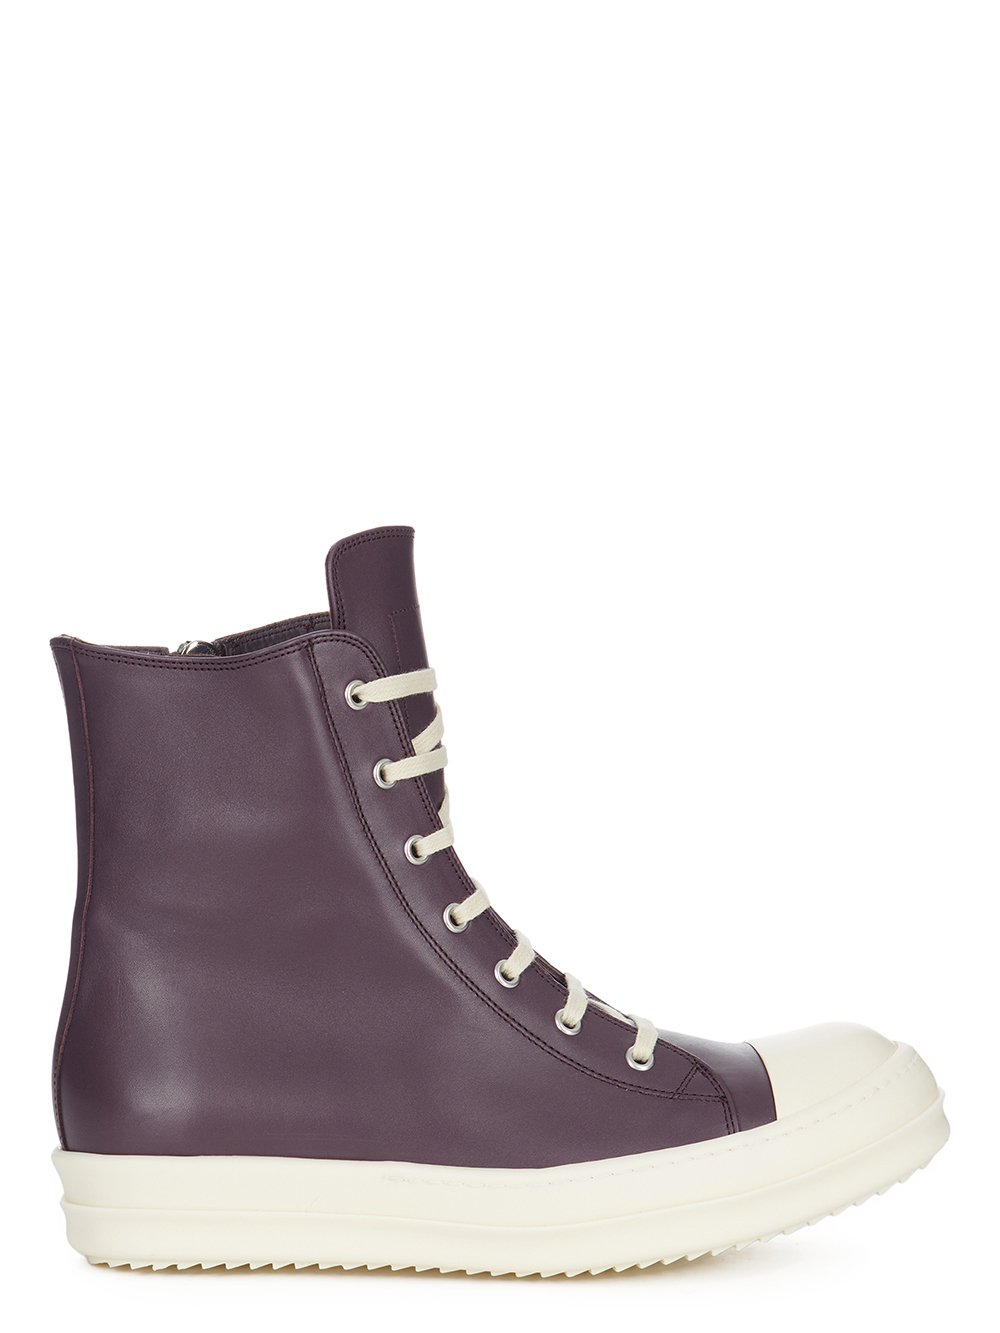 RICK OWENS FW23 LUXOR SNEAKERS IN AMETHYST AND MILK CORTINA GREASE CALF LEATHER